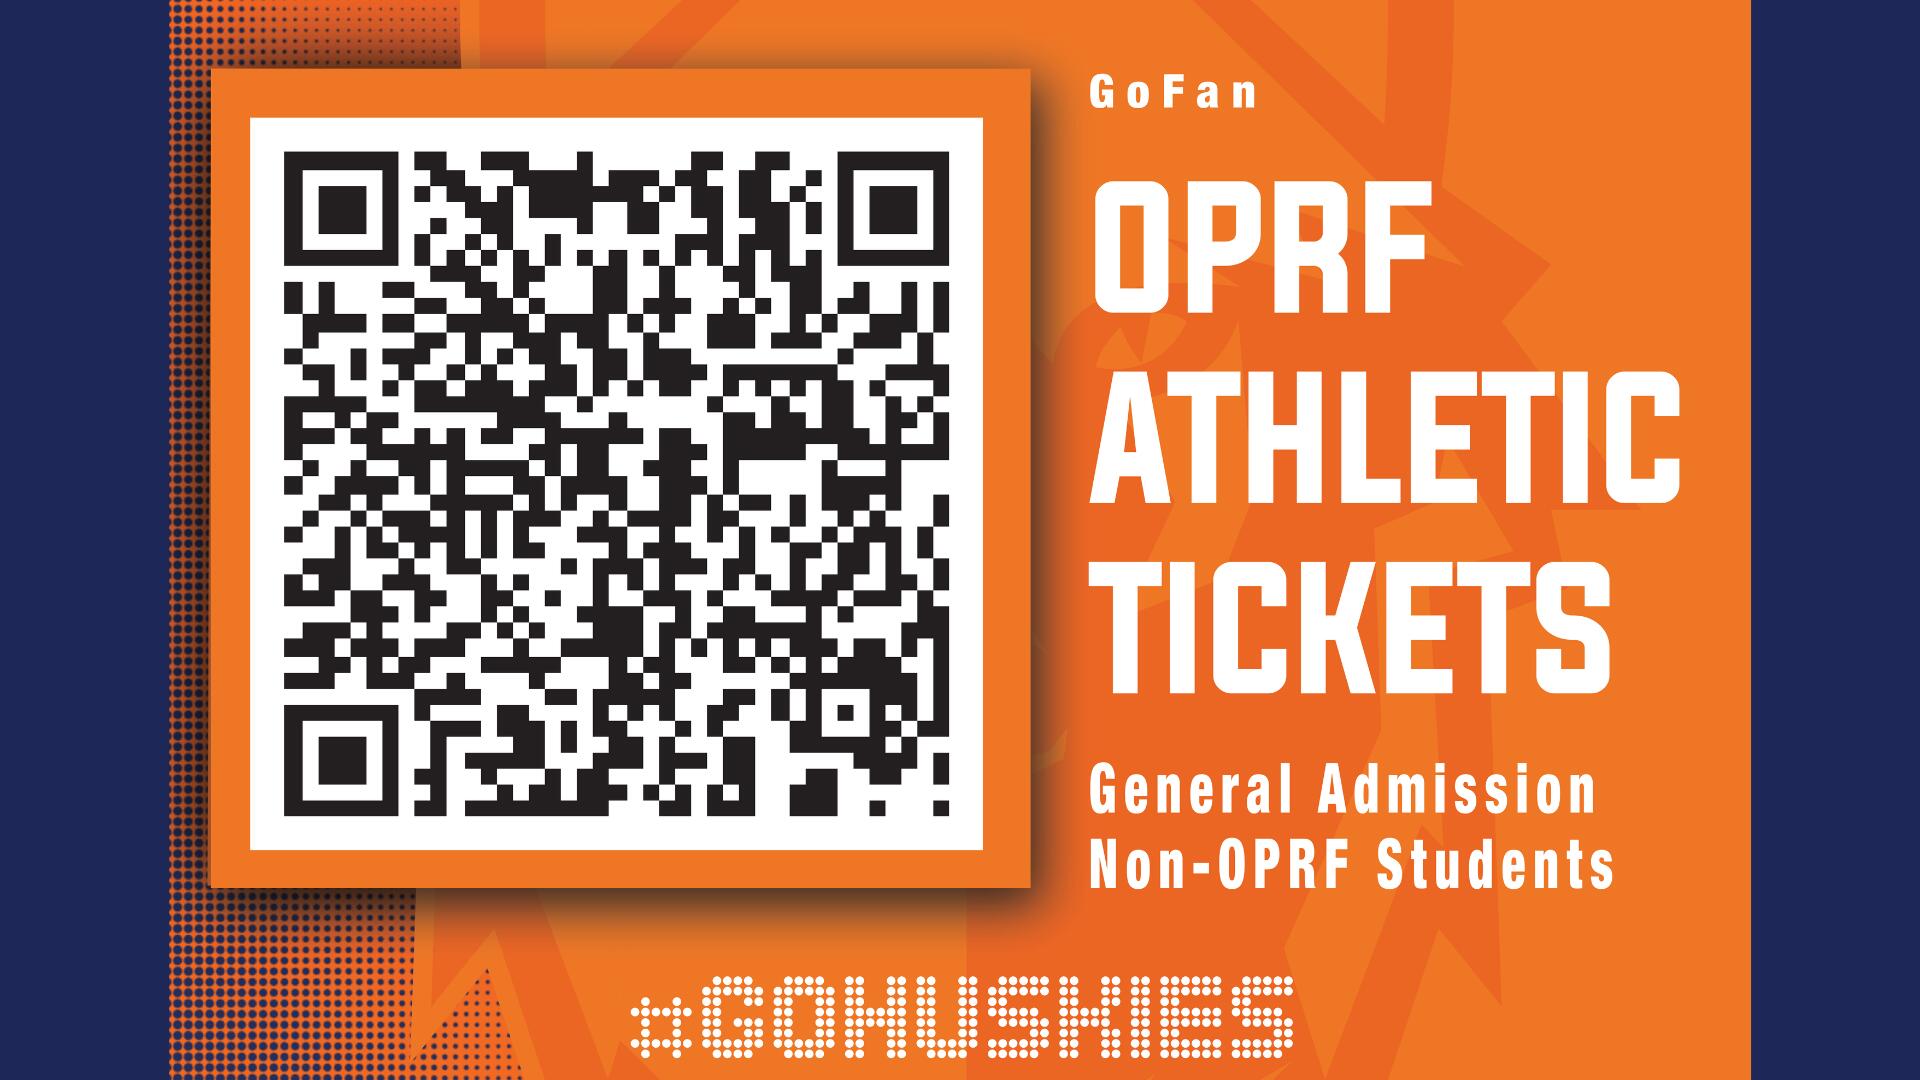 Purchase digital tickets to athletic events